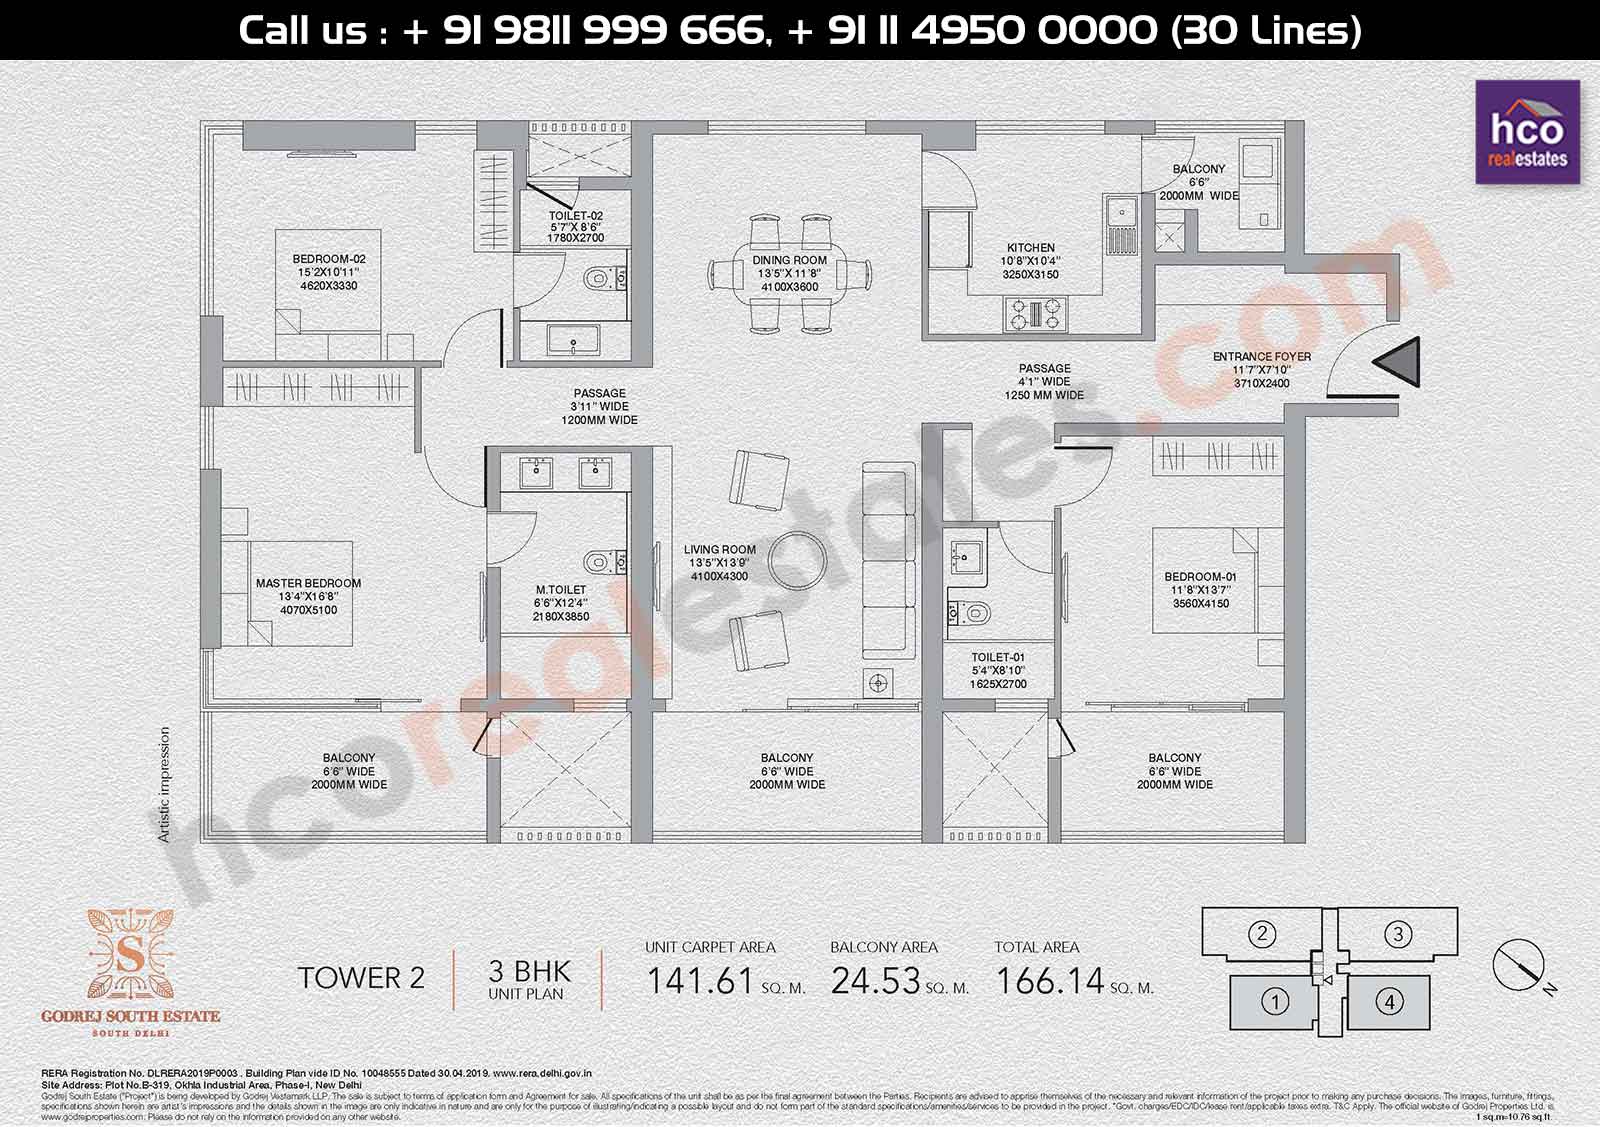 Tower - 2, 3 BHK : 166 Sq. Mtr.